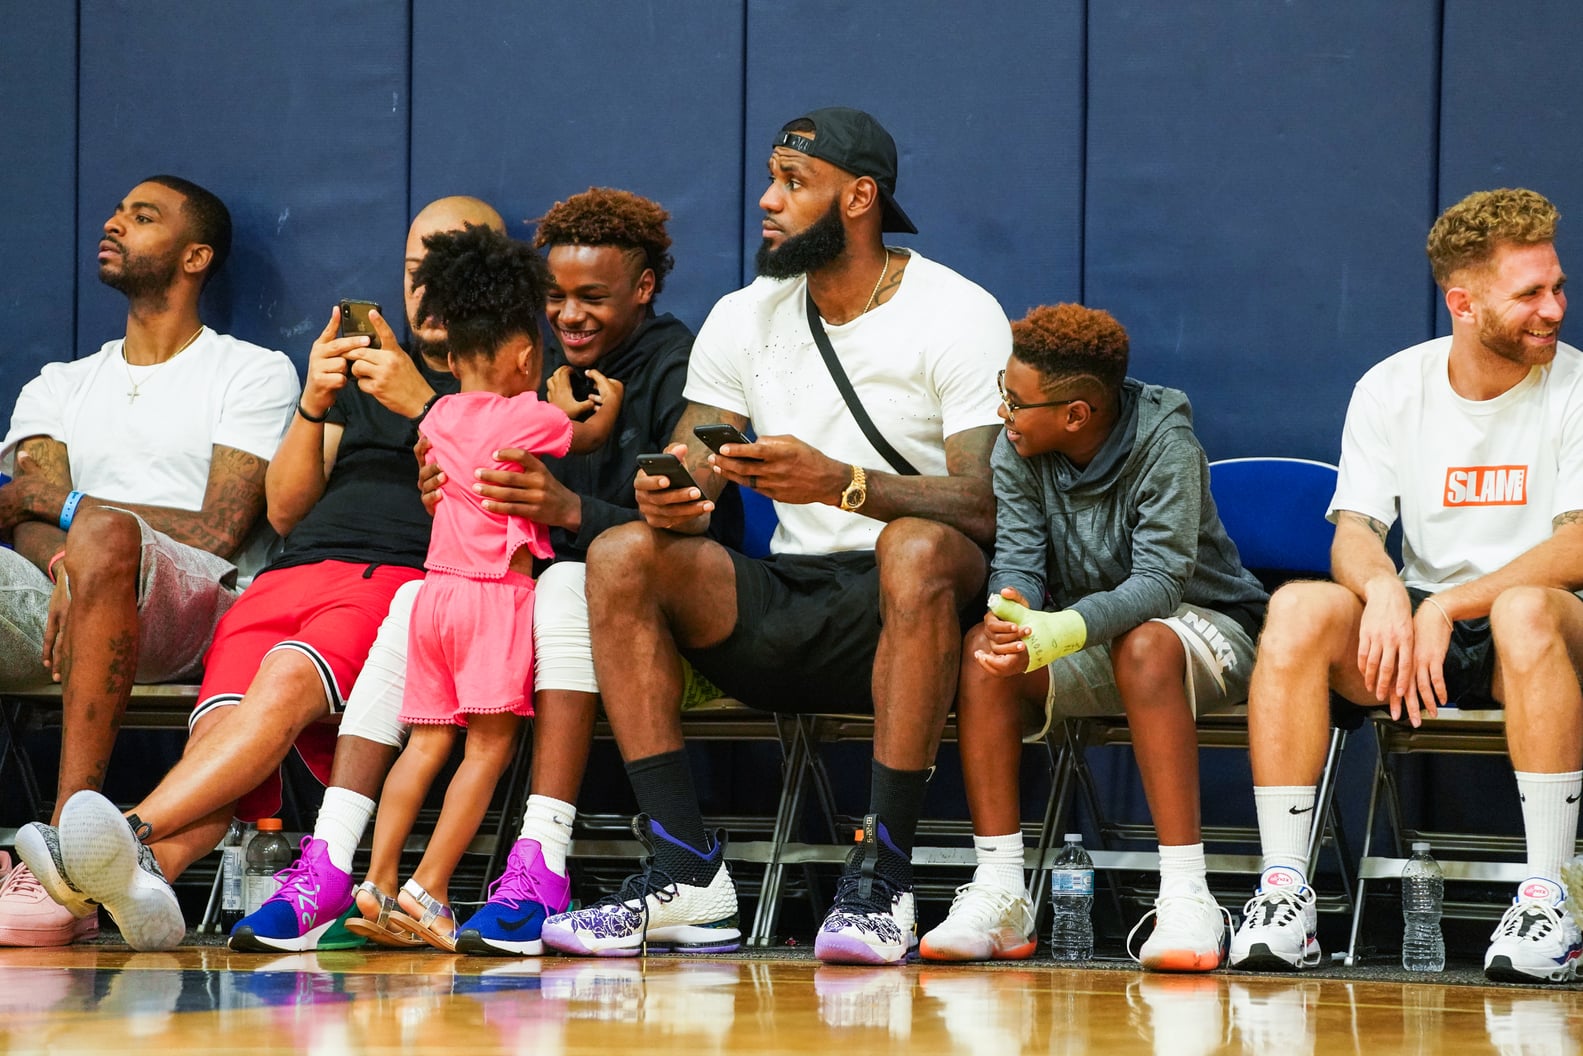 What was the story Lebron James told his children about growing up to be NBA legends?